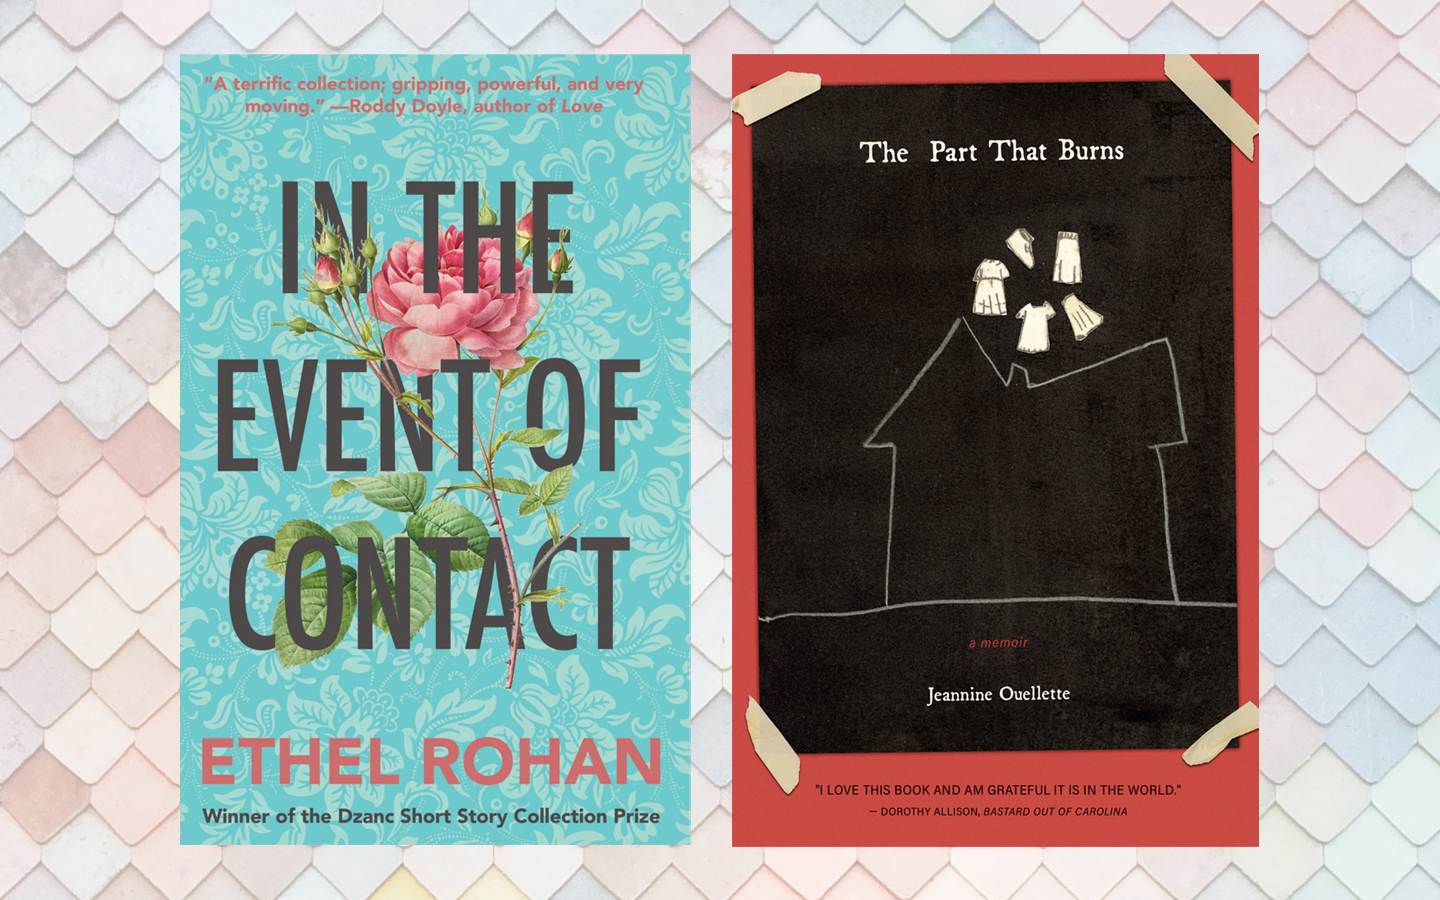 Ethel Rohan in conversation with Jeannine Ouellette